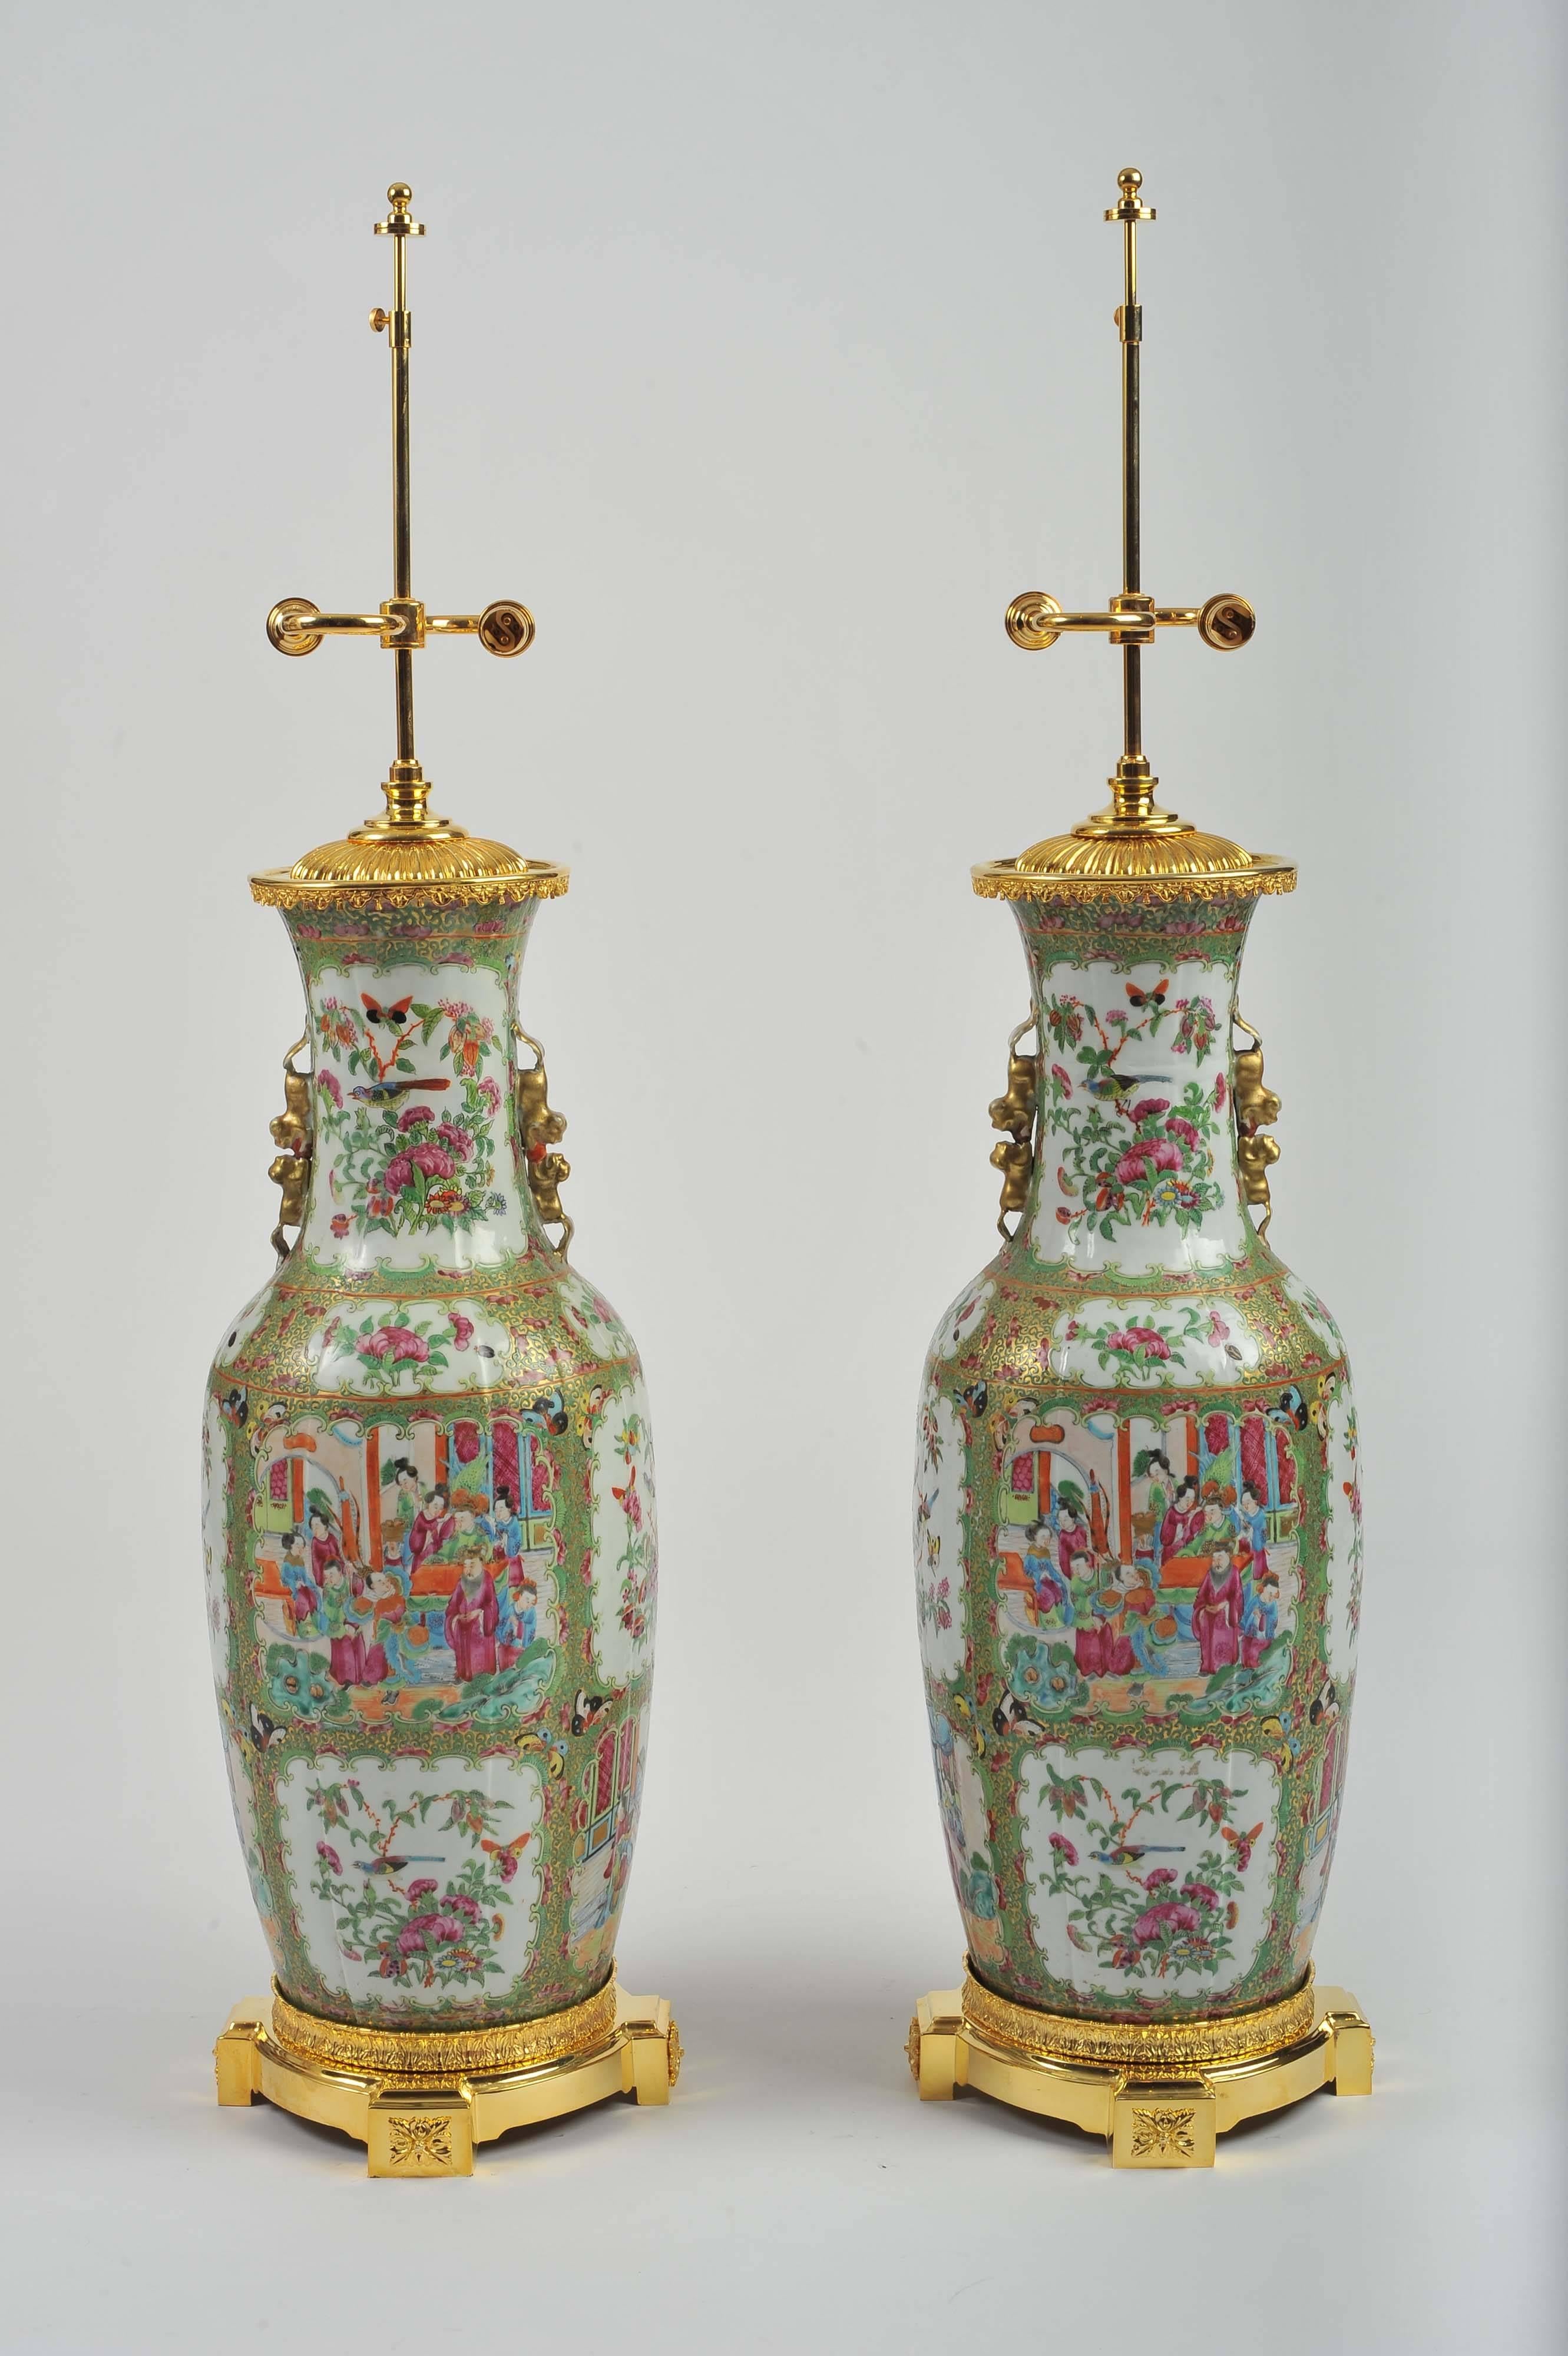 Ceramic Pair of Late 19th Century Ormolu-Mounted Chinese Canton Vases